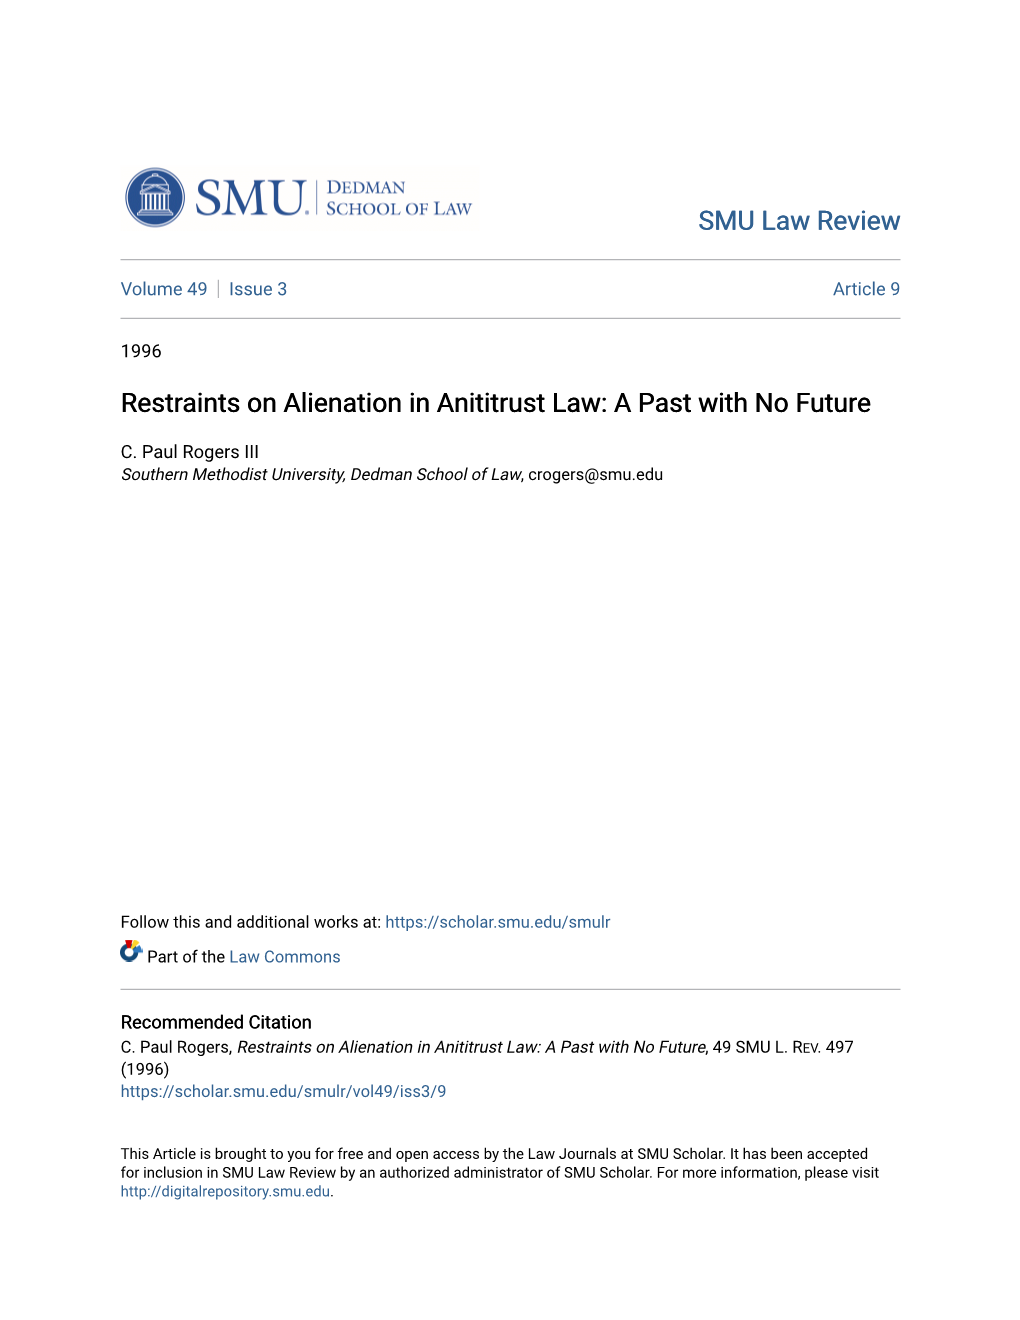 Restraints on Alienation in Anititrust Law: a Past with No Future